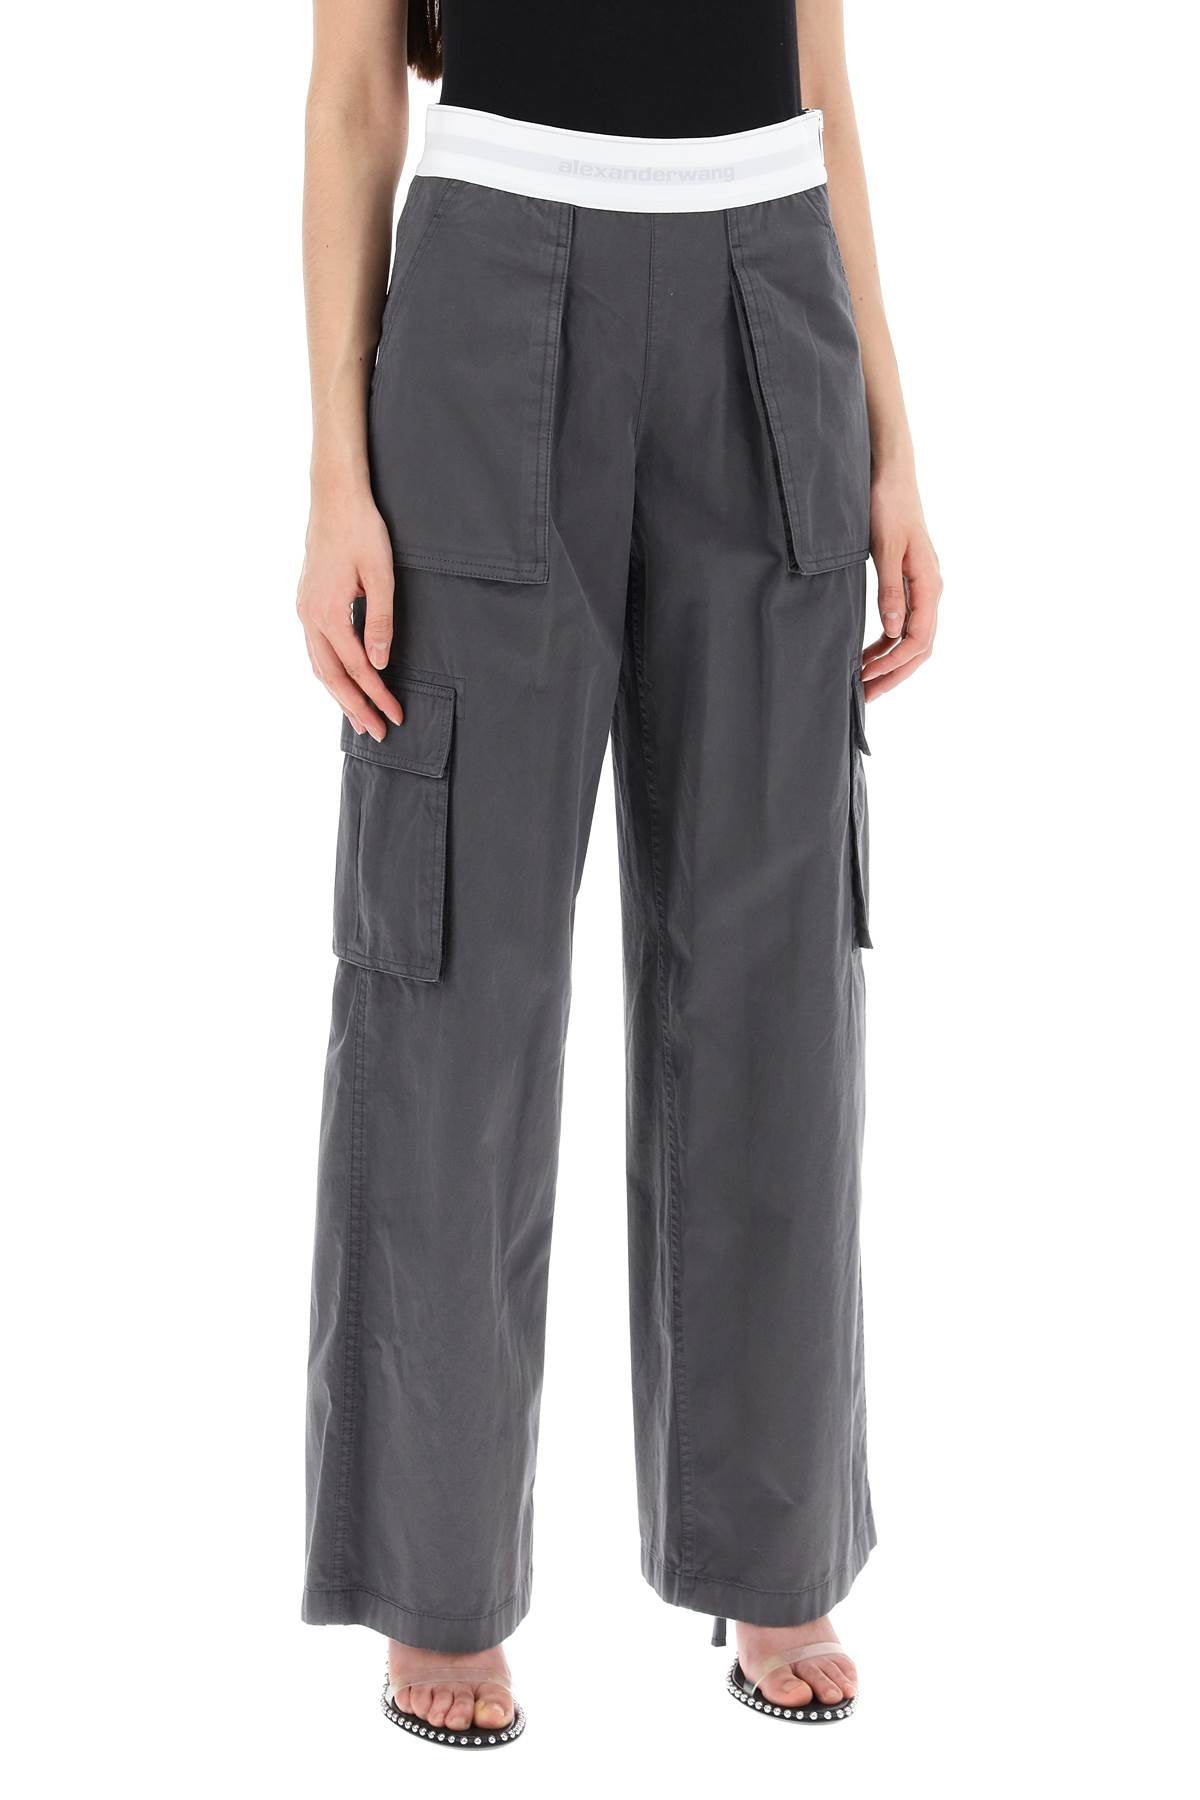 Alexander Wang Rave Cargo Pants With Elastic Waistband In Gray